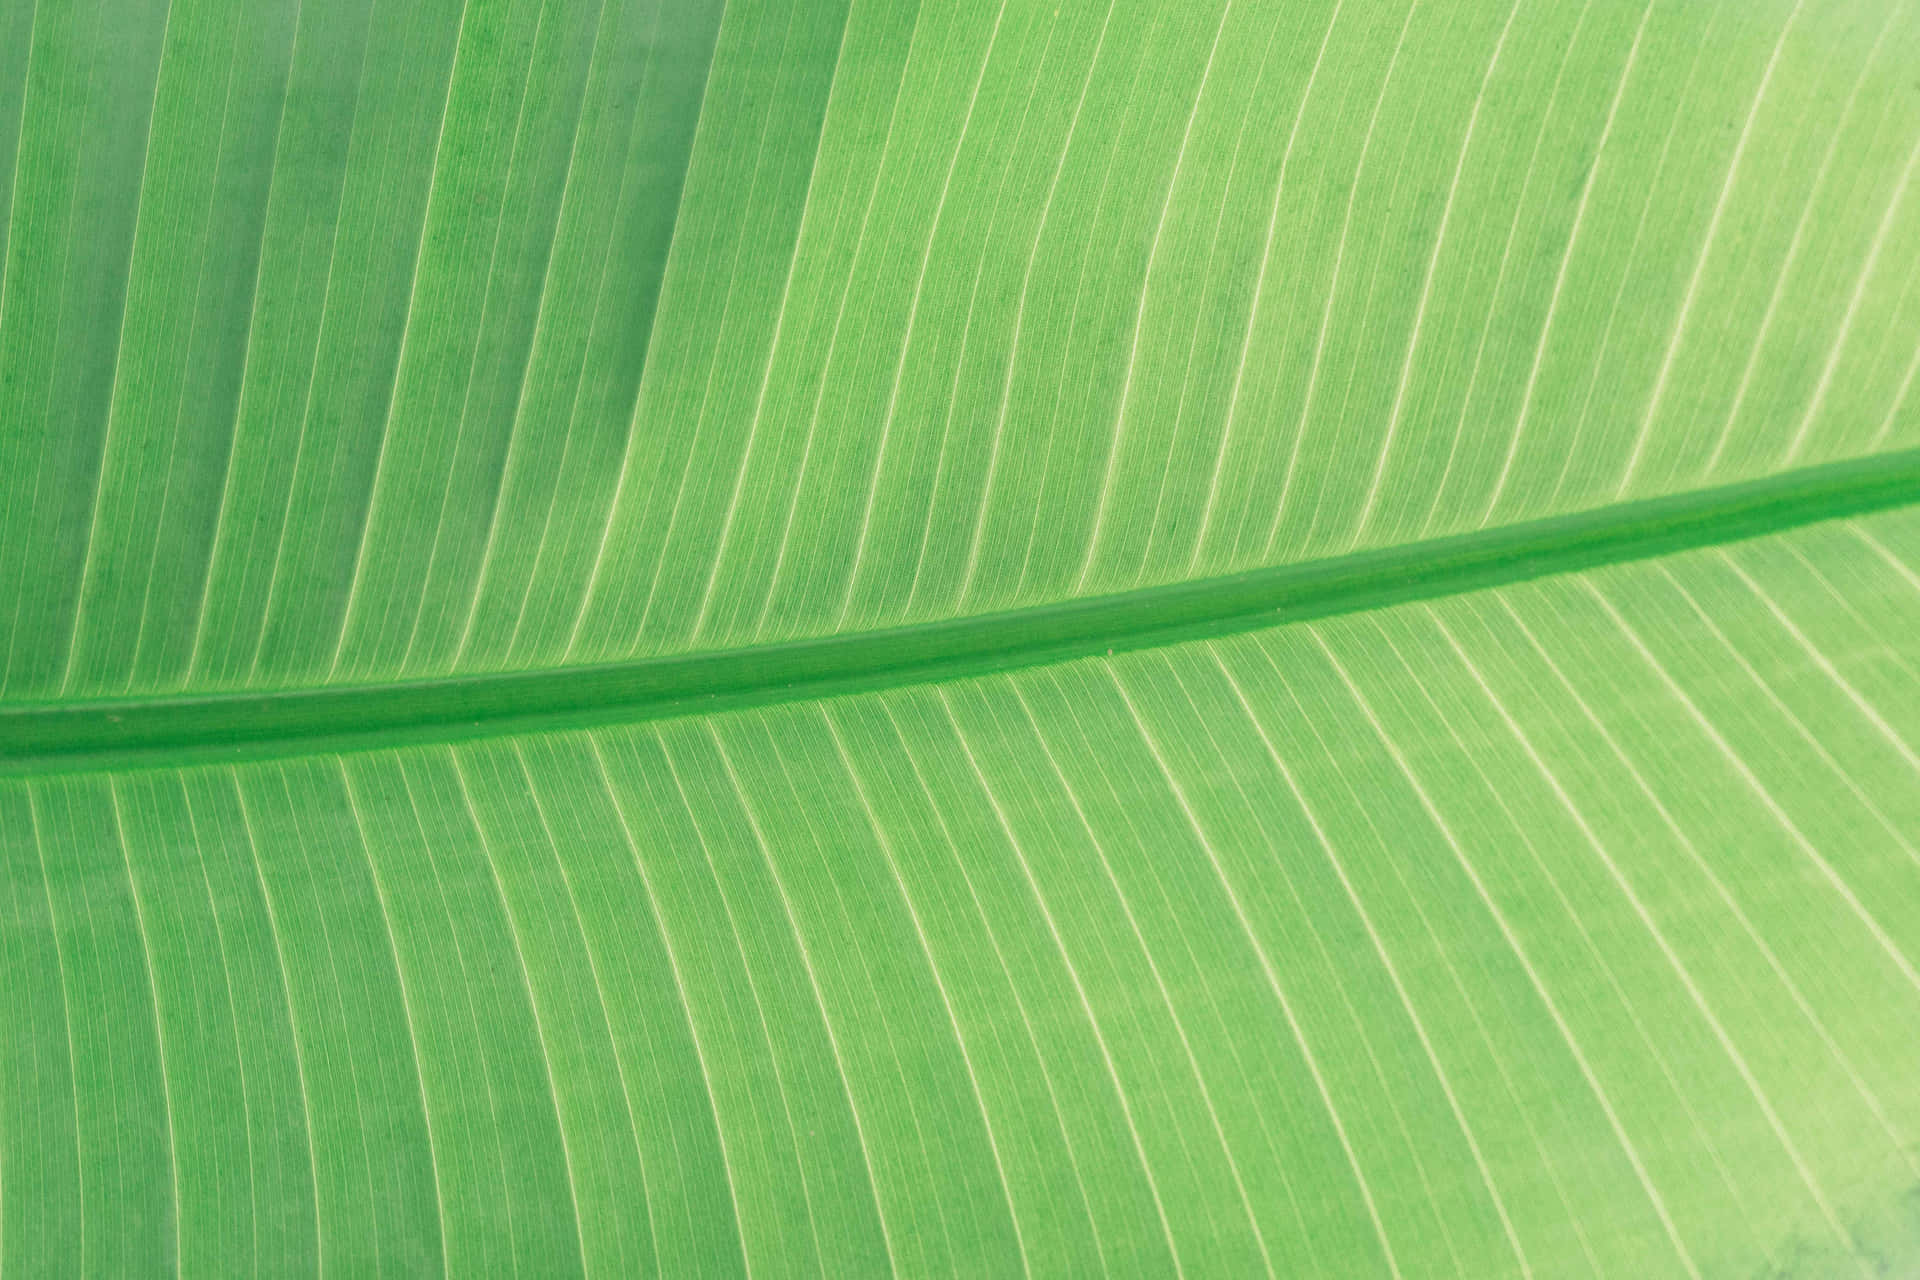 Enjoy the beauty of nature with a banana leaf background